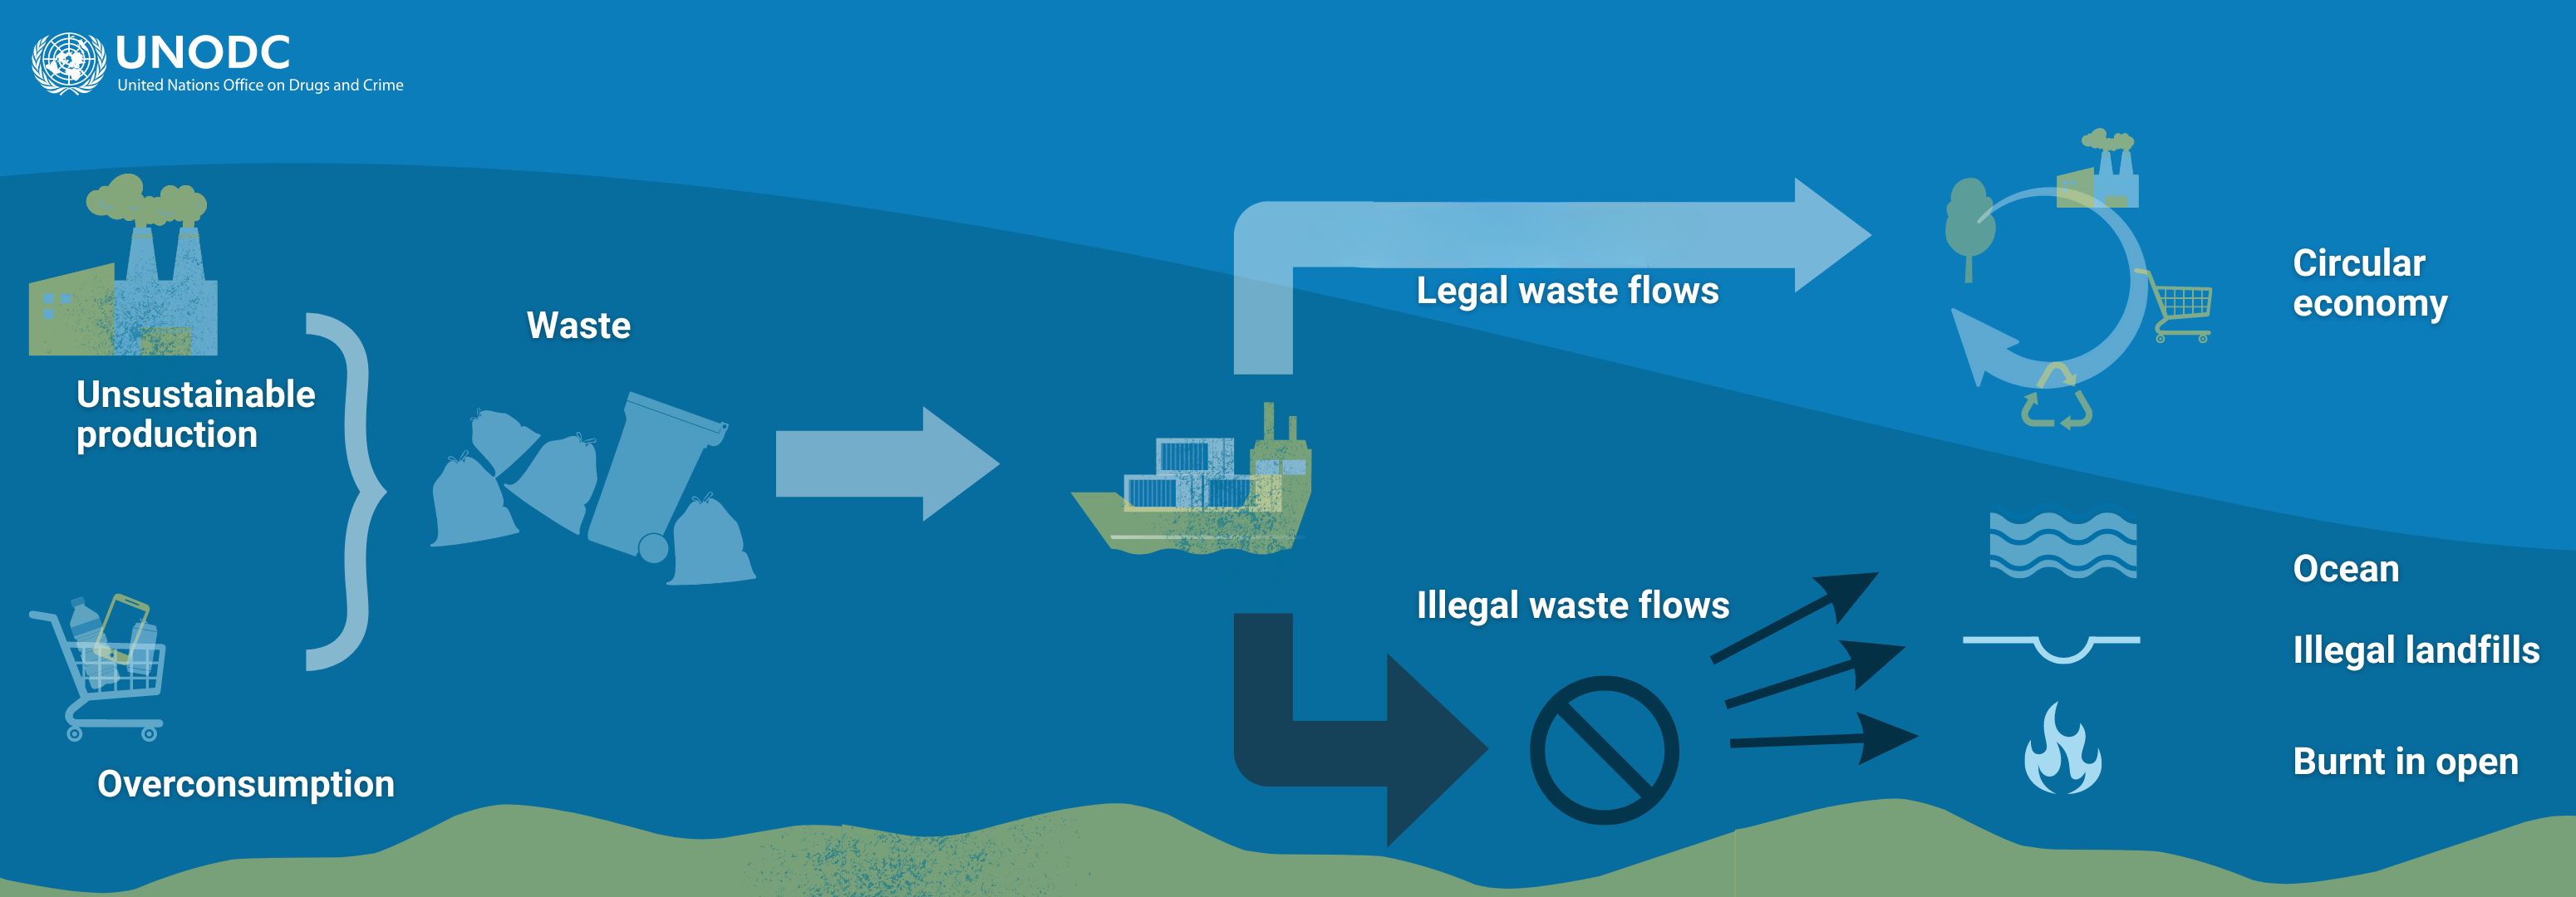 Waste trafficking leads to most waste ending up in illegal landfills, the ocean, or burnt in the open, thwarting any ambitions towards a circular economy. (c)UNODC